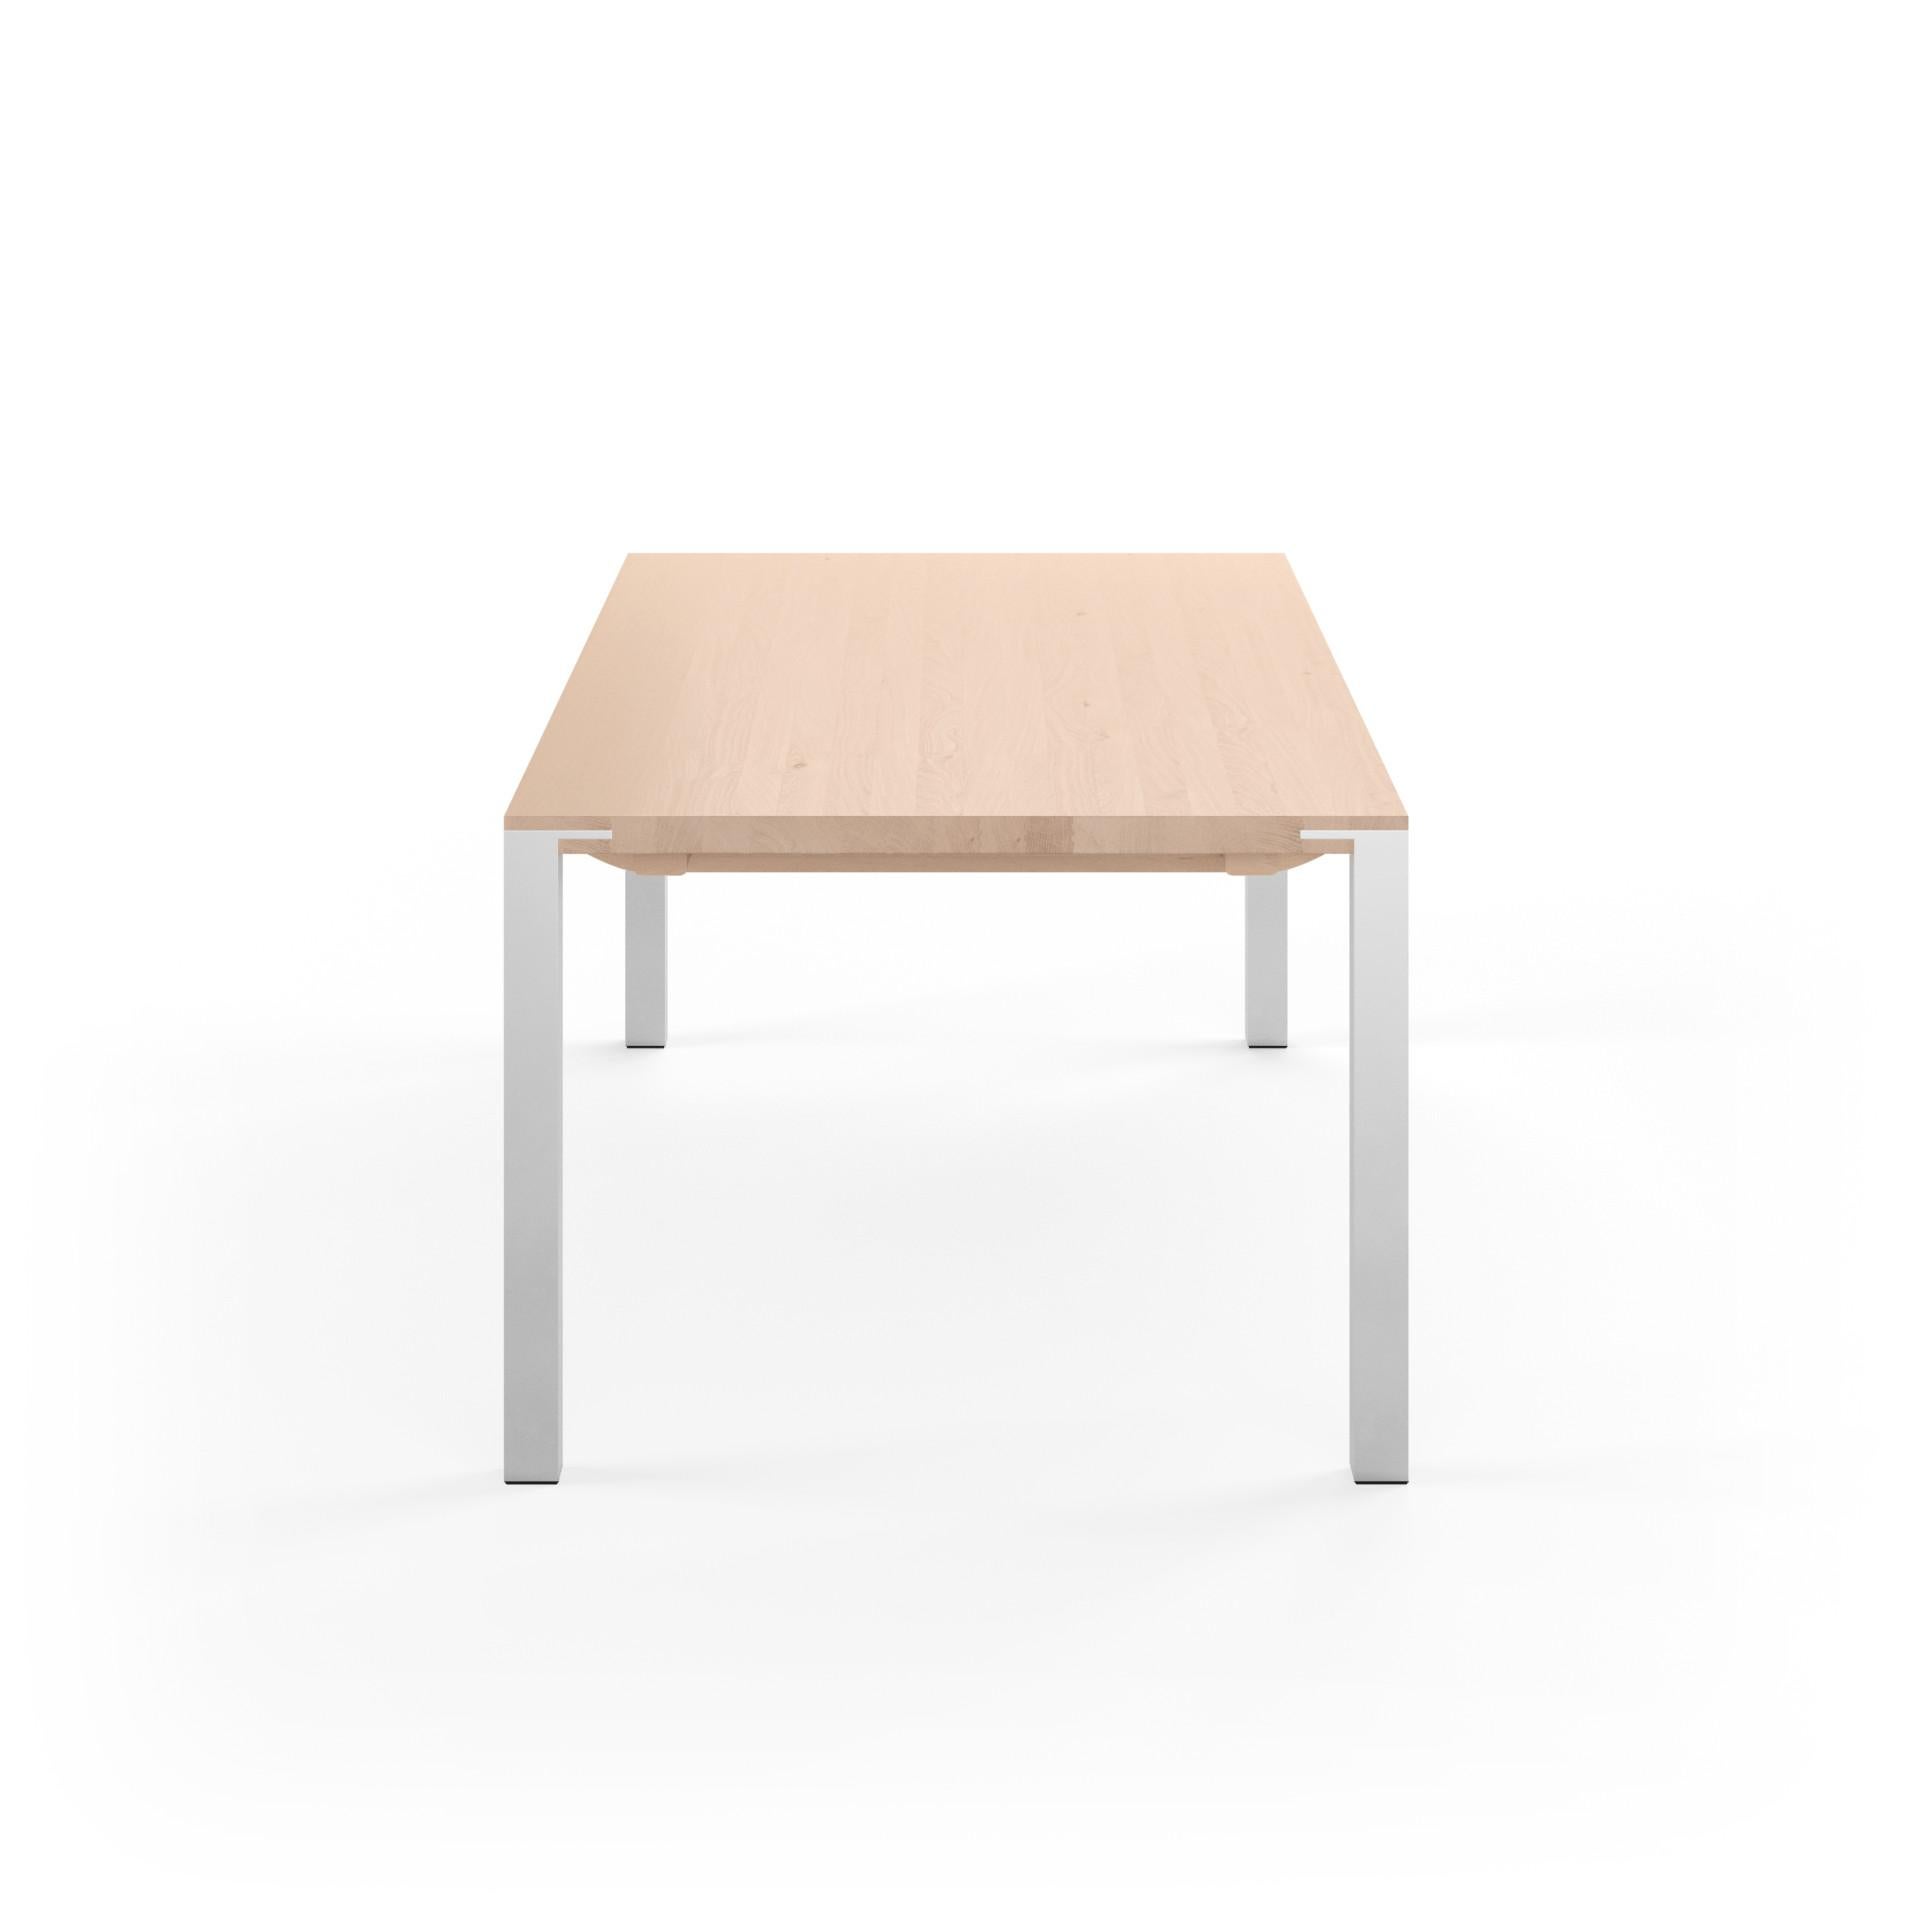 The GM 2100 series is designed with an eye for detail without compromising on a simple and elegant expression. The steel legs is elegantly combined with the solid wood, giving the table its unique and distinctive expression.

GM 2100 table series is